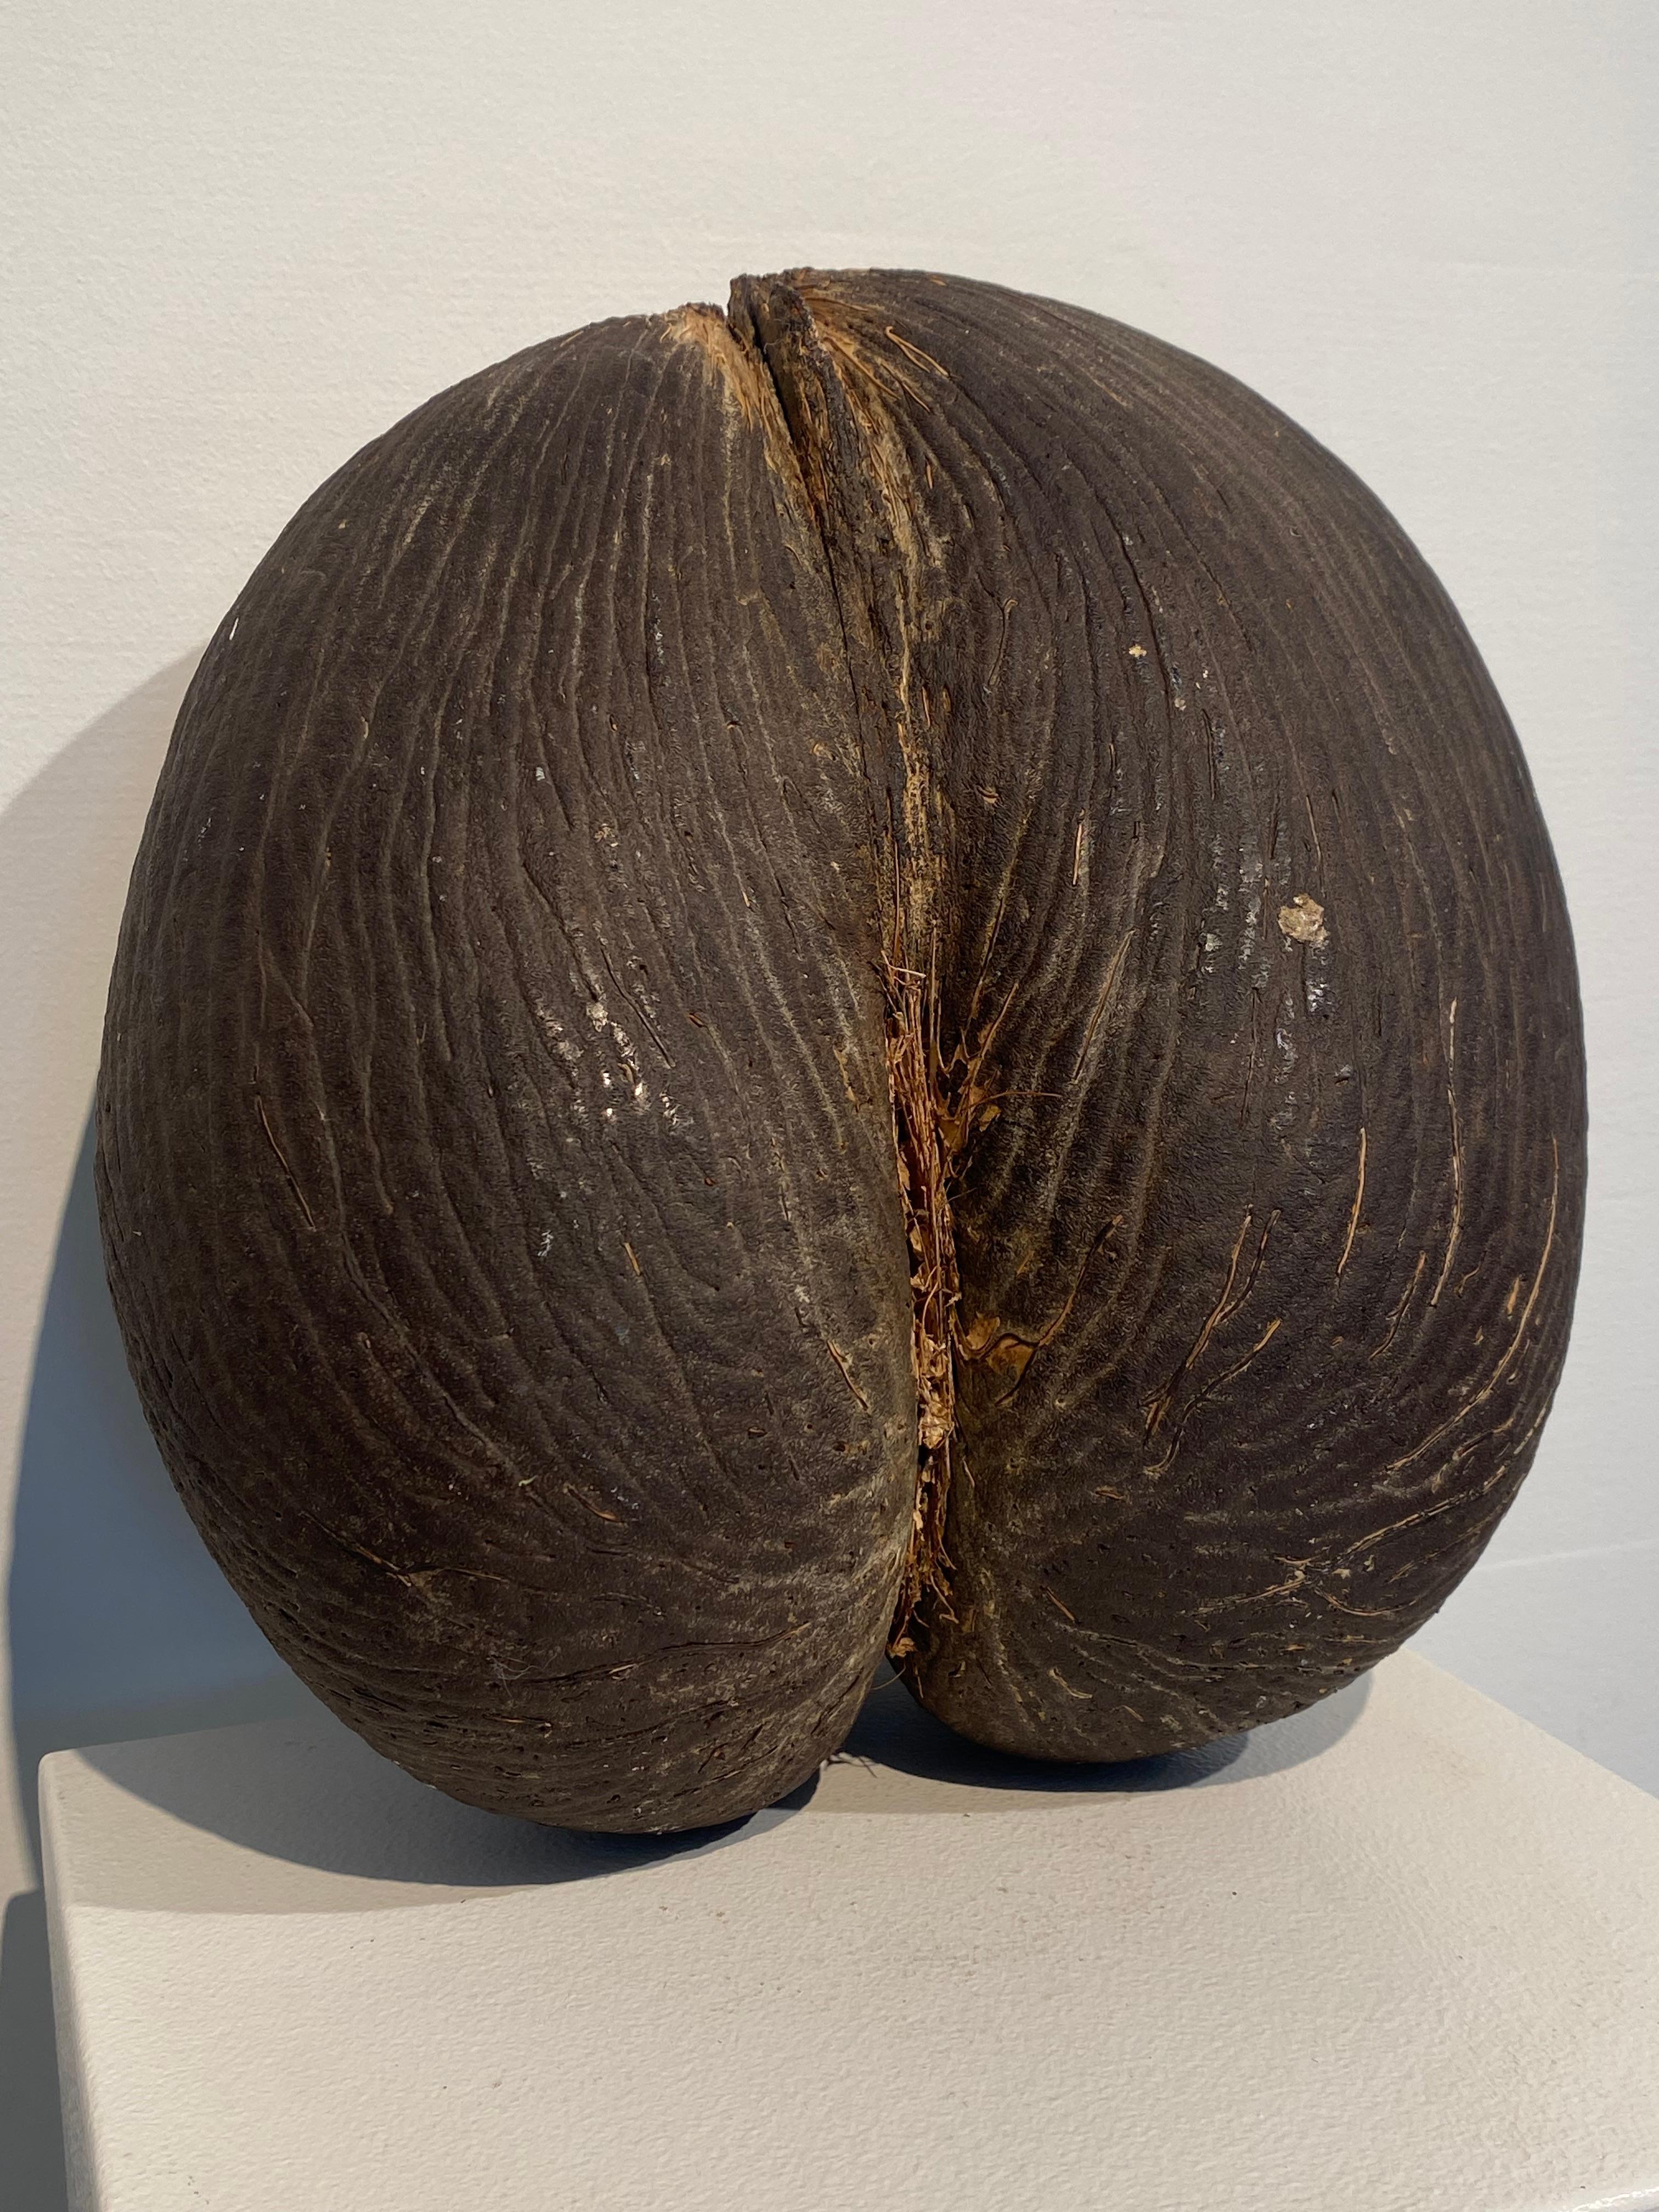 Coconut Exceptional Coco de Mer from the Seychelles For Sale